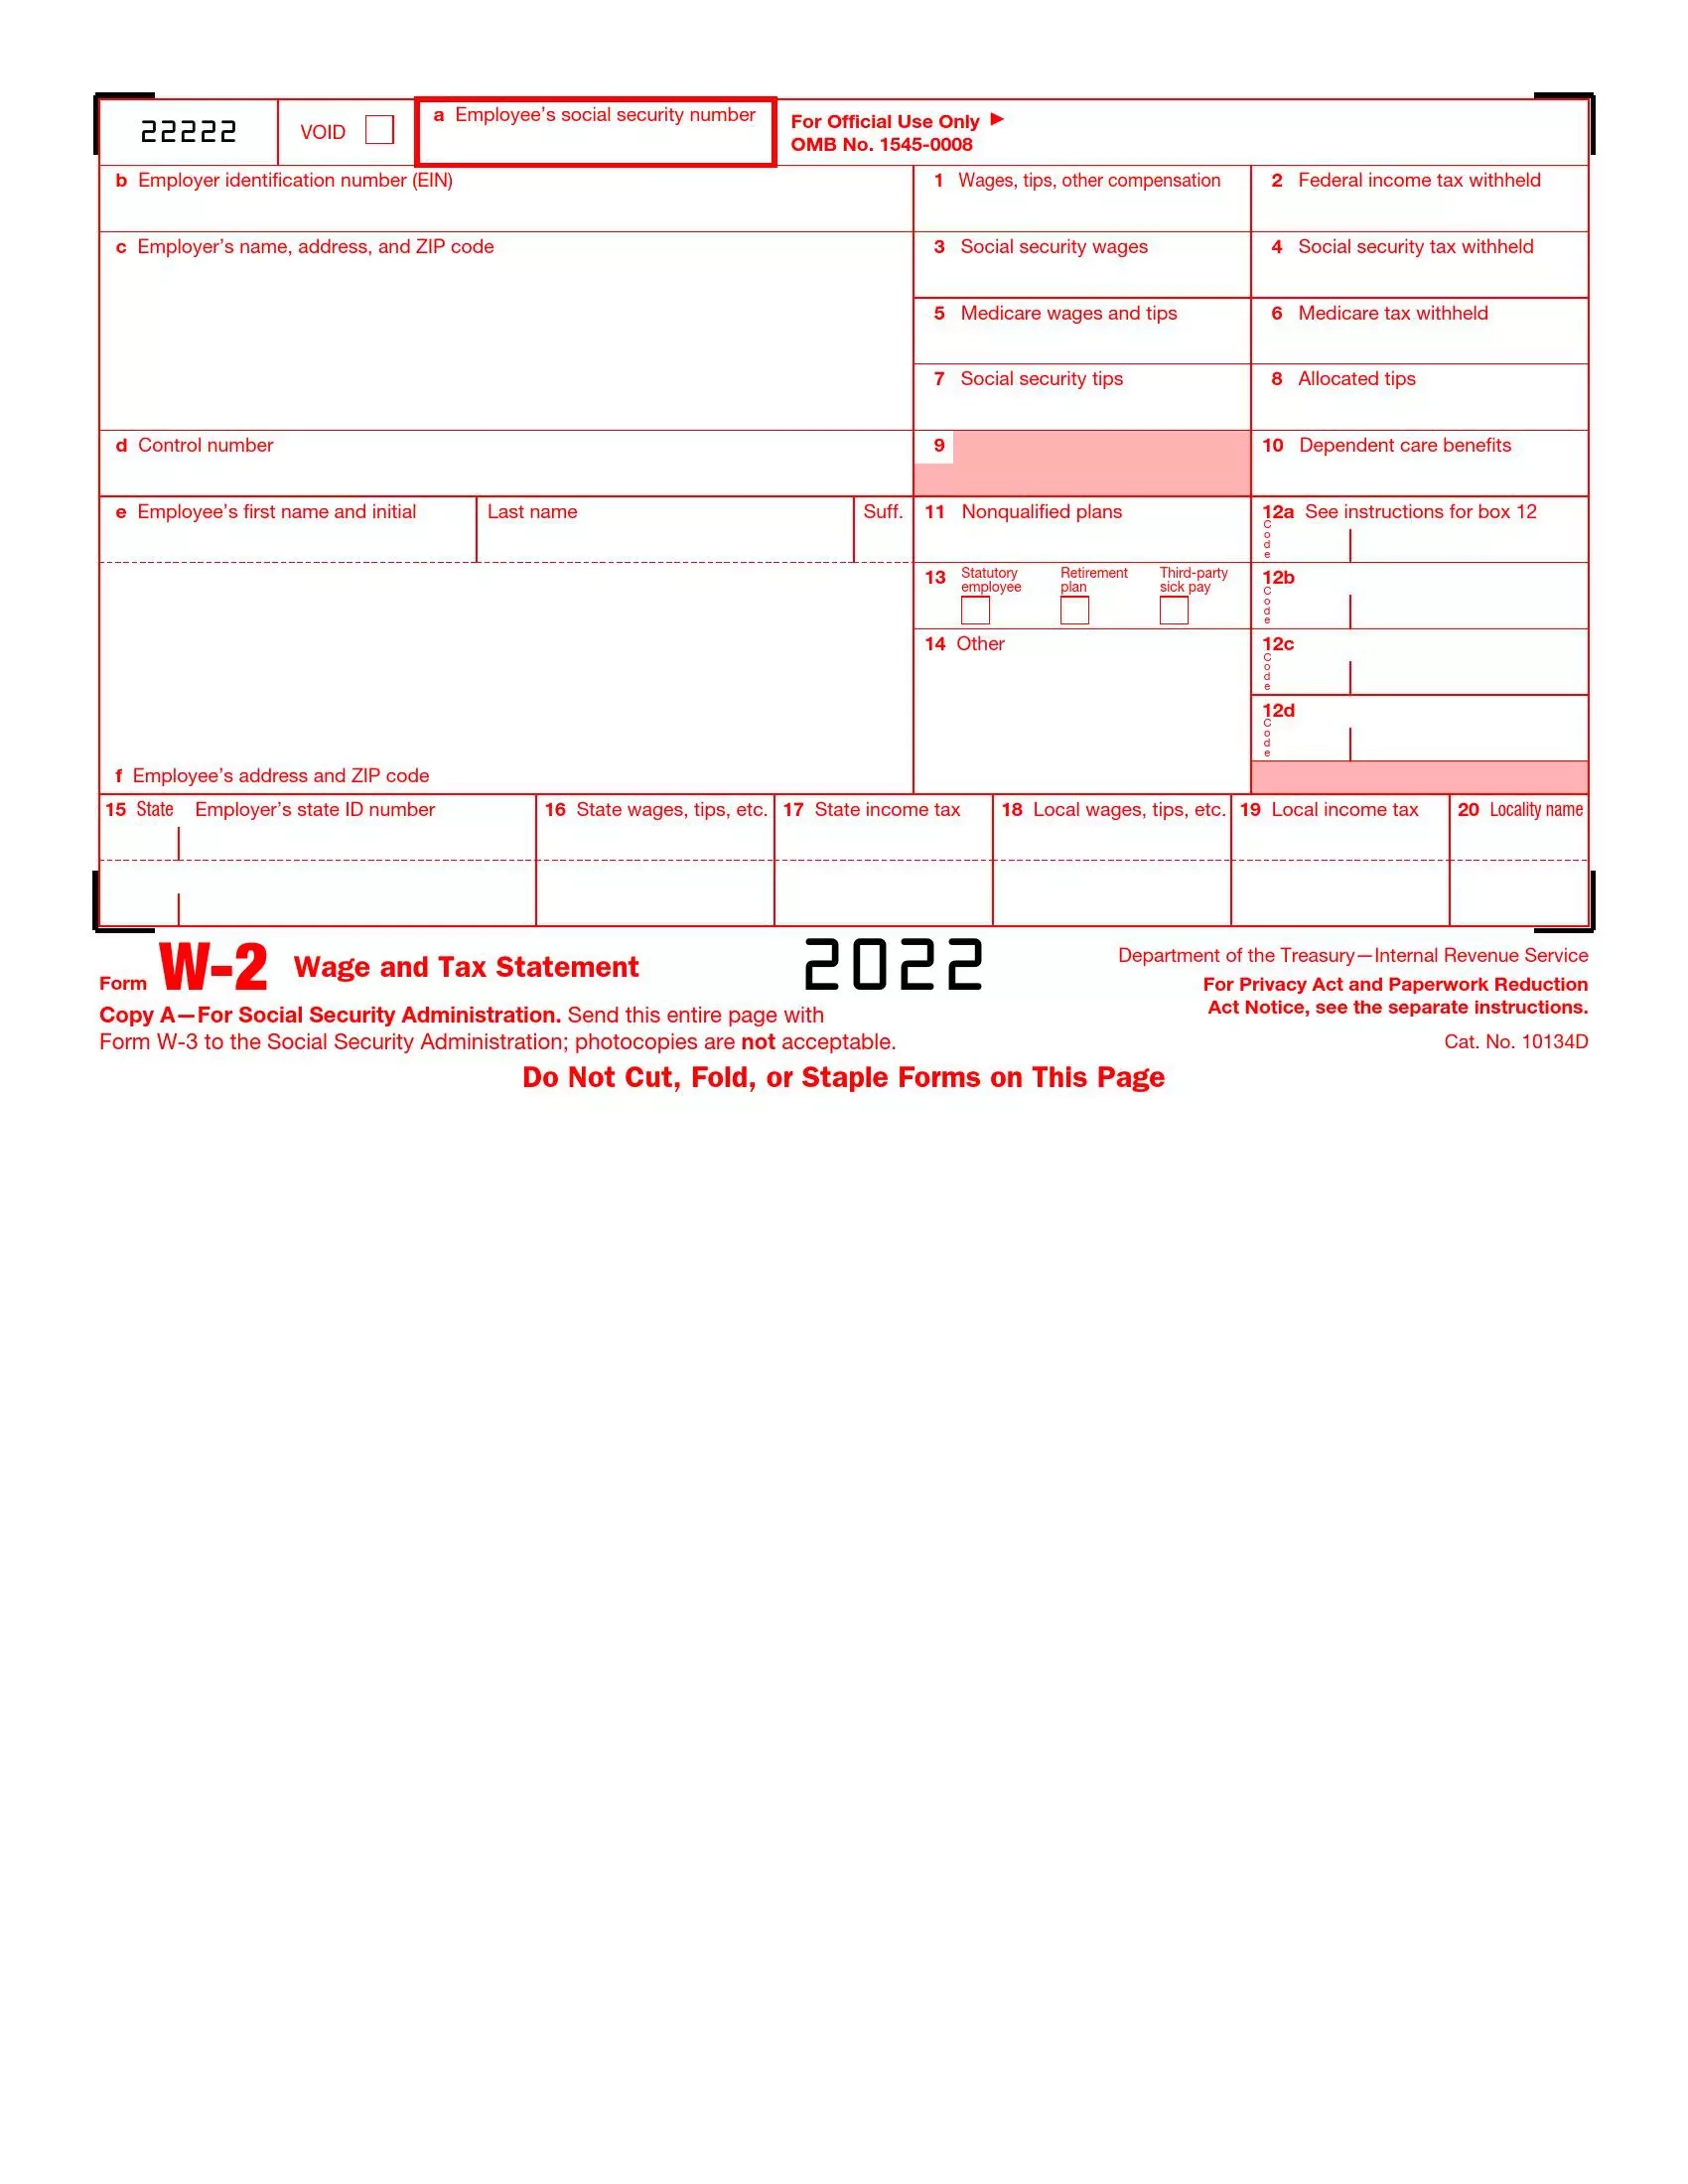 Irs Form W-2 ≡ Fill Out Printable Pdf Forms Online with W2 Forms Download